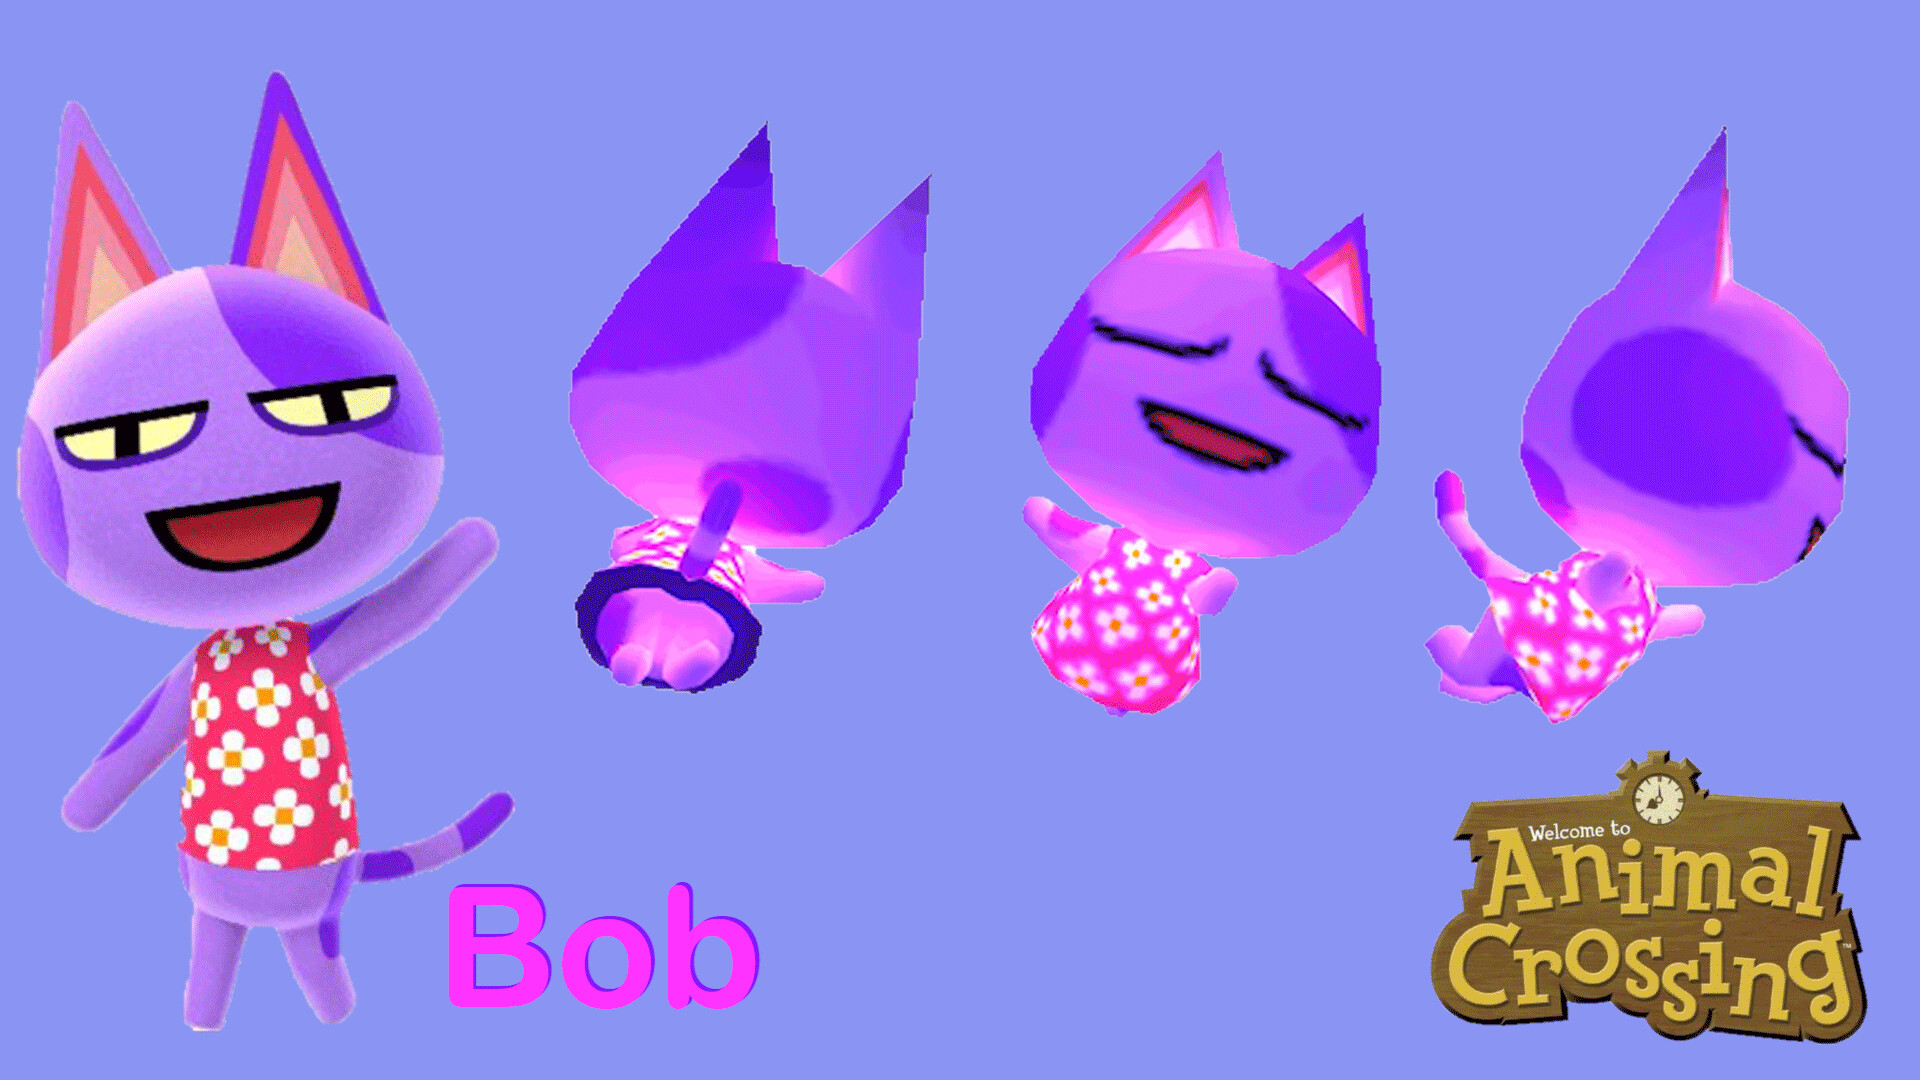 ArtStation - Bob (Animal Crossing Character) without and with Keychain